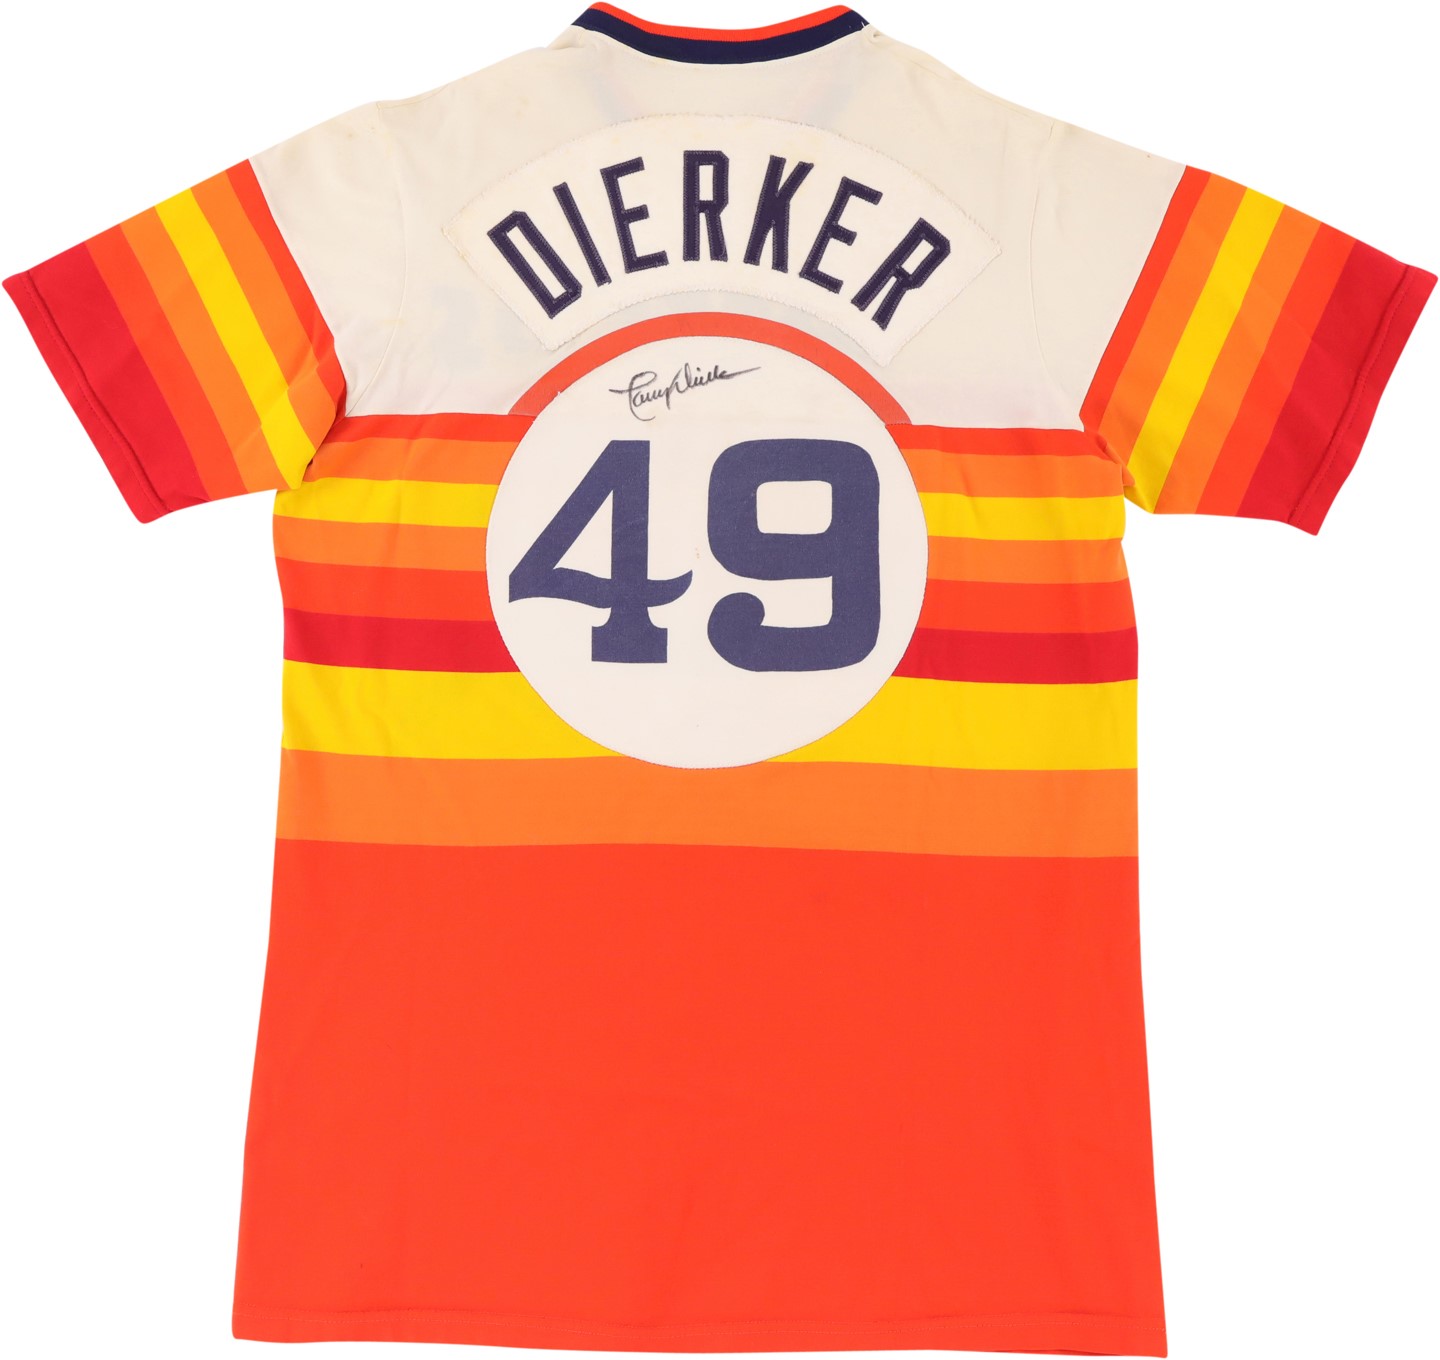 - 1975 Larry Dierker Houston Astros Signed Game Worn Jersey - One Year Style!